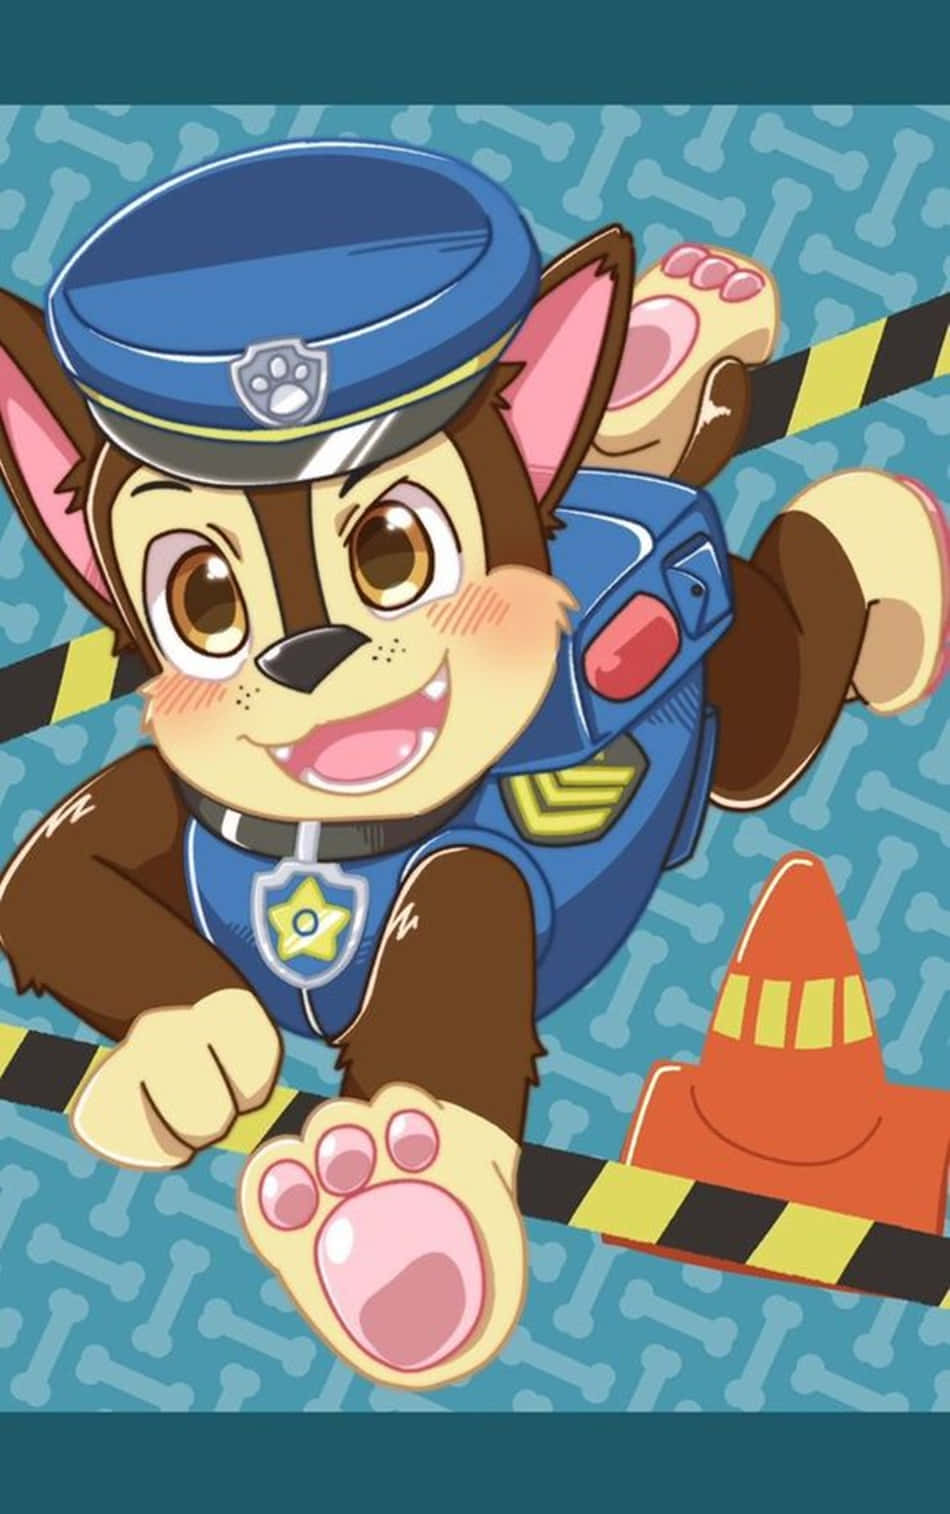 Chase Paw Patrol Running In Action Wallpaper